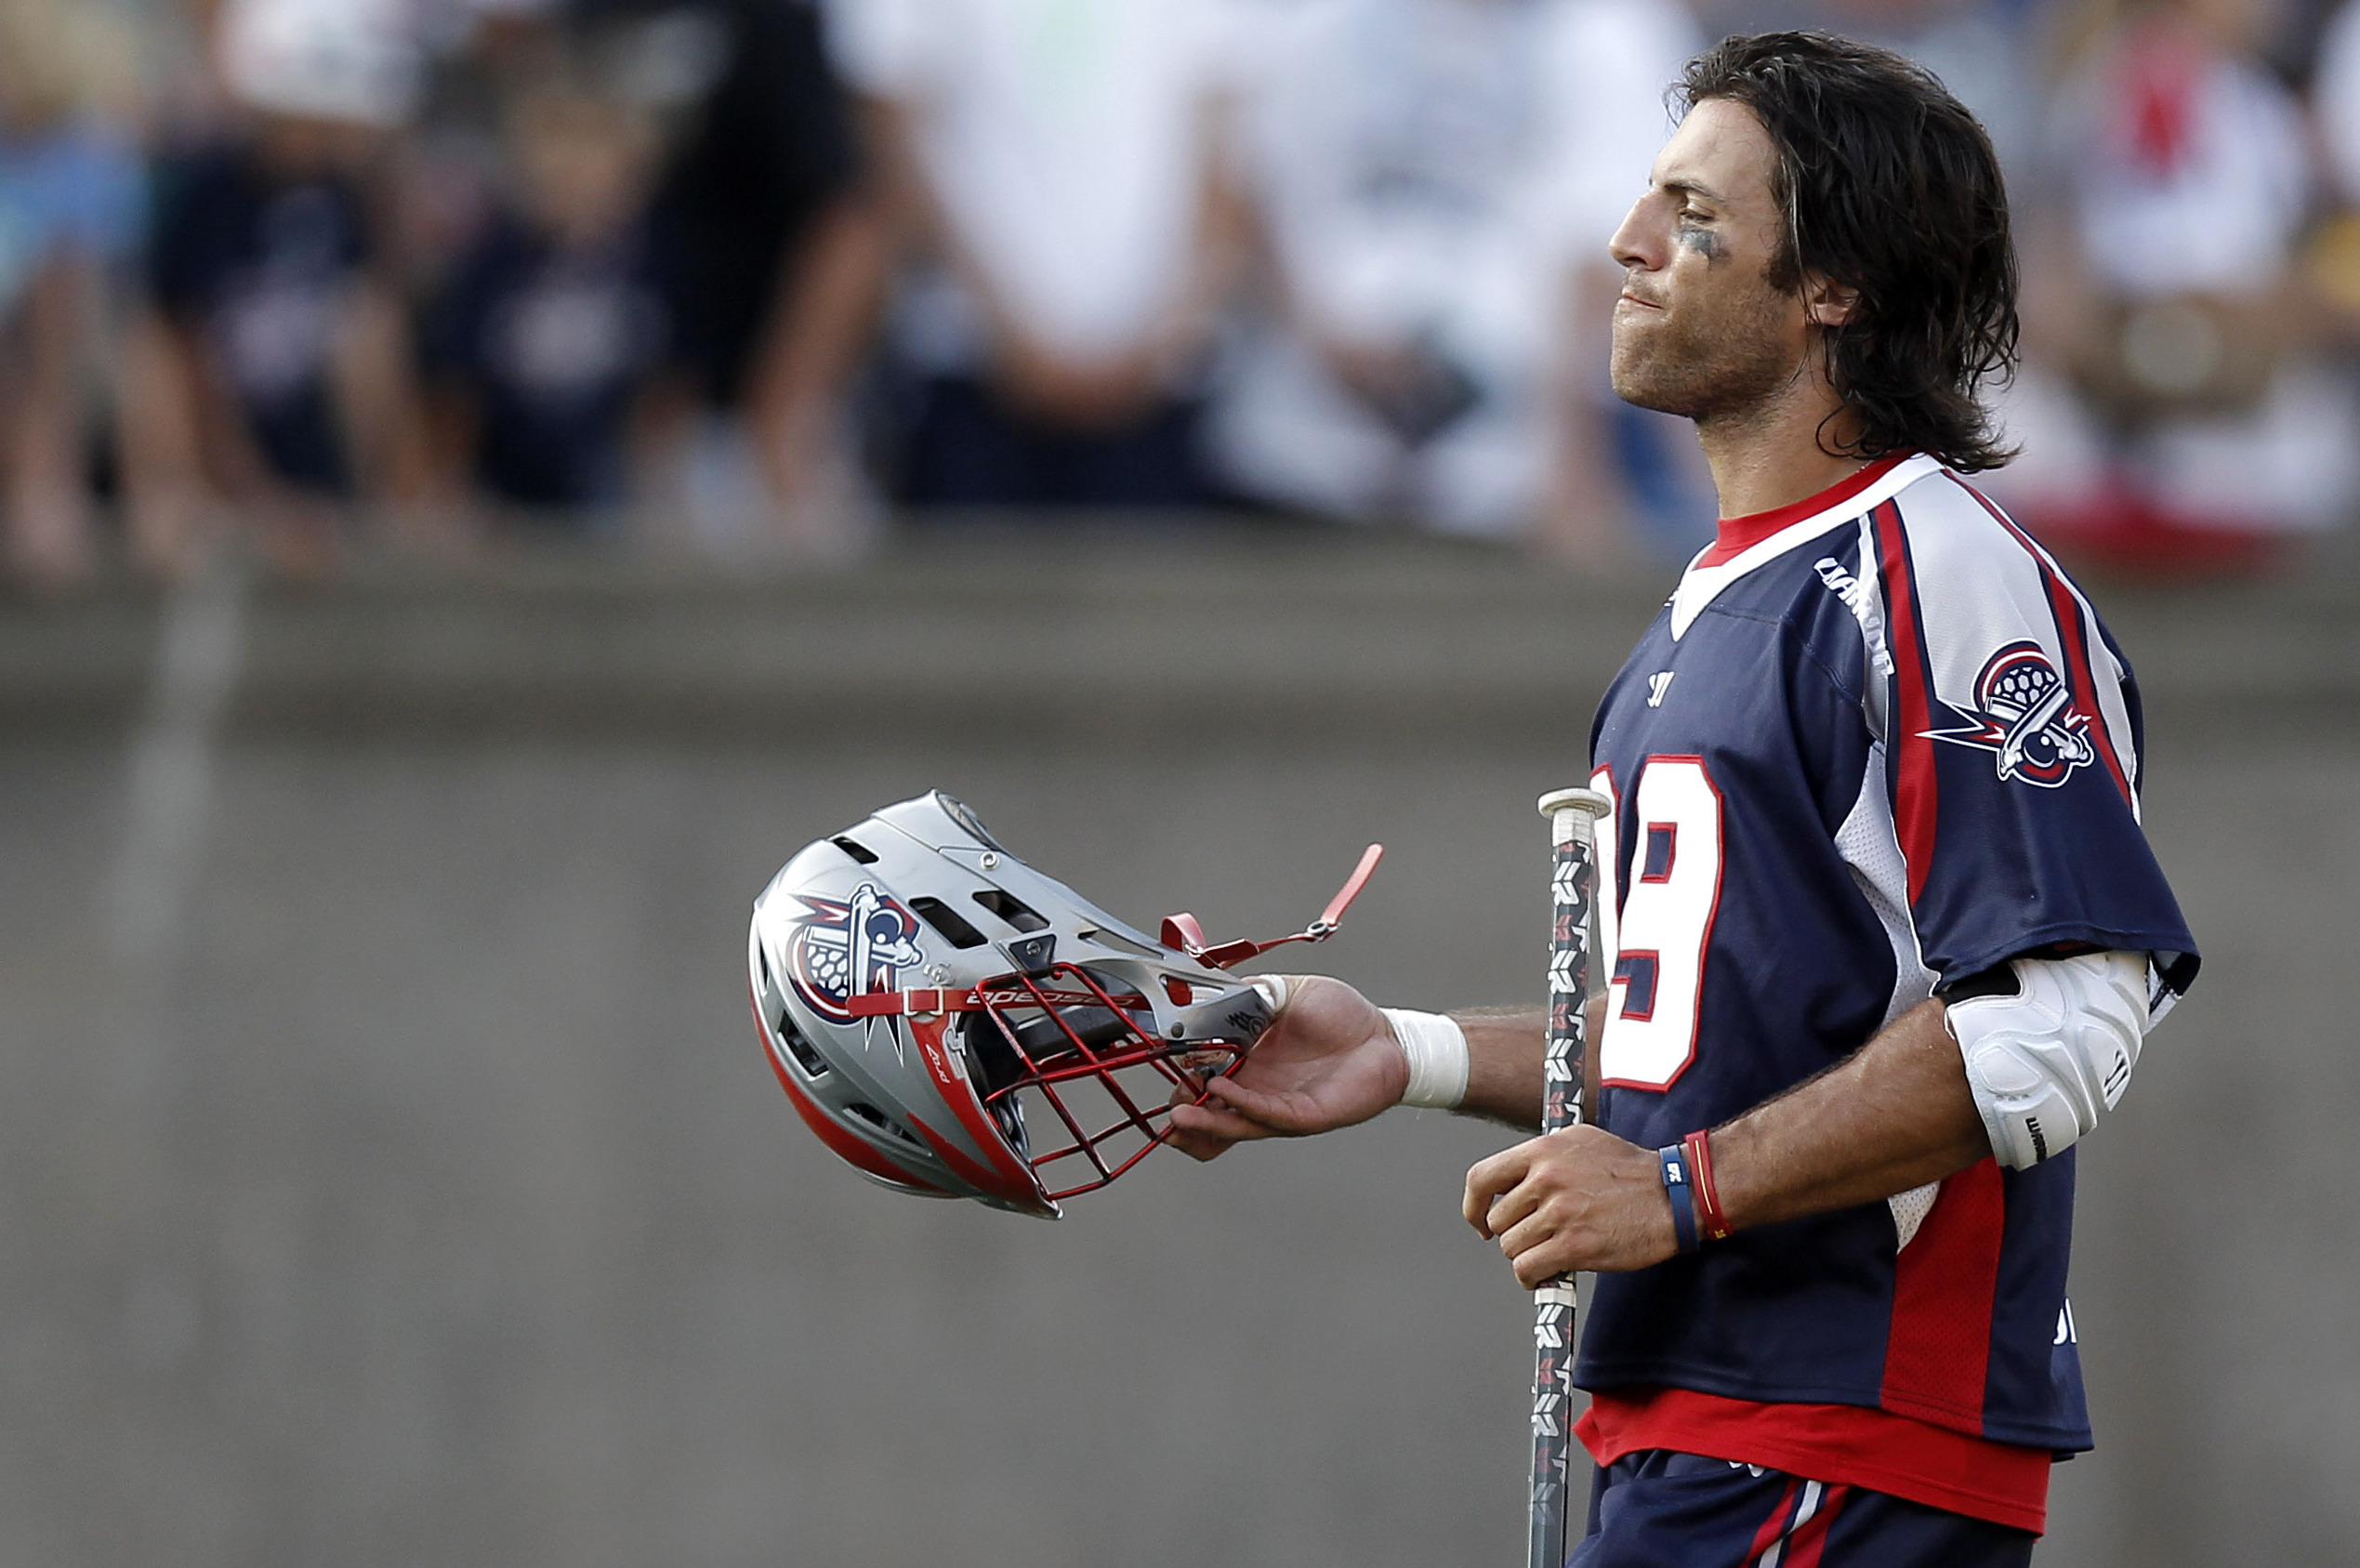 What Are The Chances of Paul Rabil Joining The Toronto Rock?